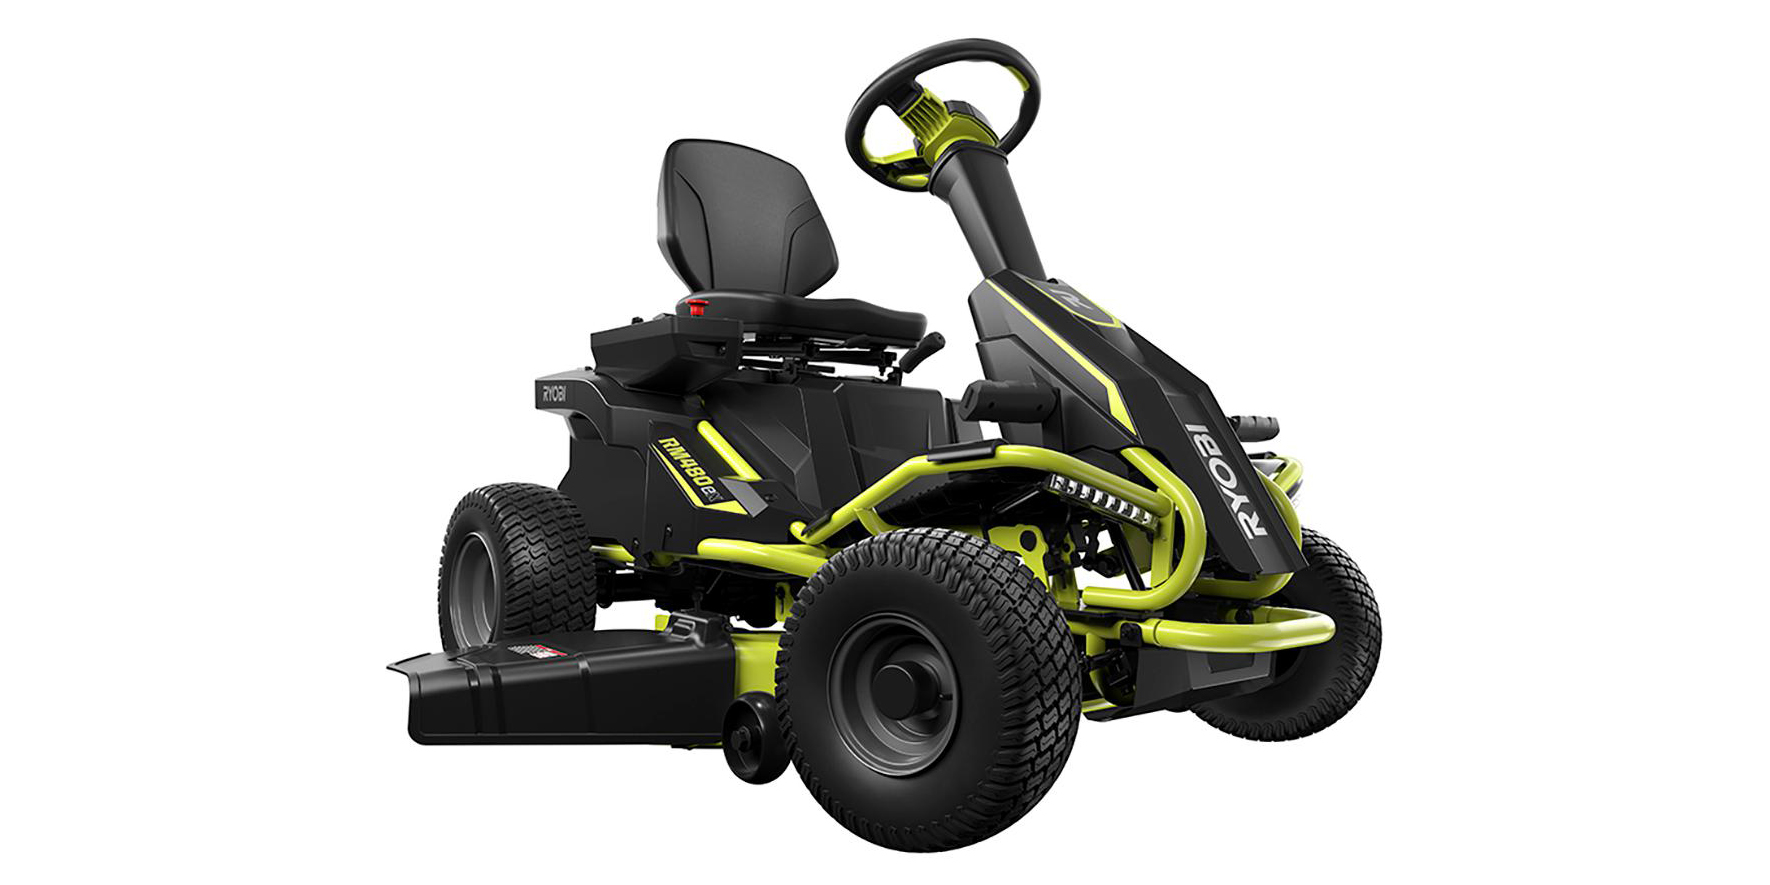 Ryobi’s electric riding lawn mower is on sale for Labor Day, more in today’s Green Deals